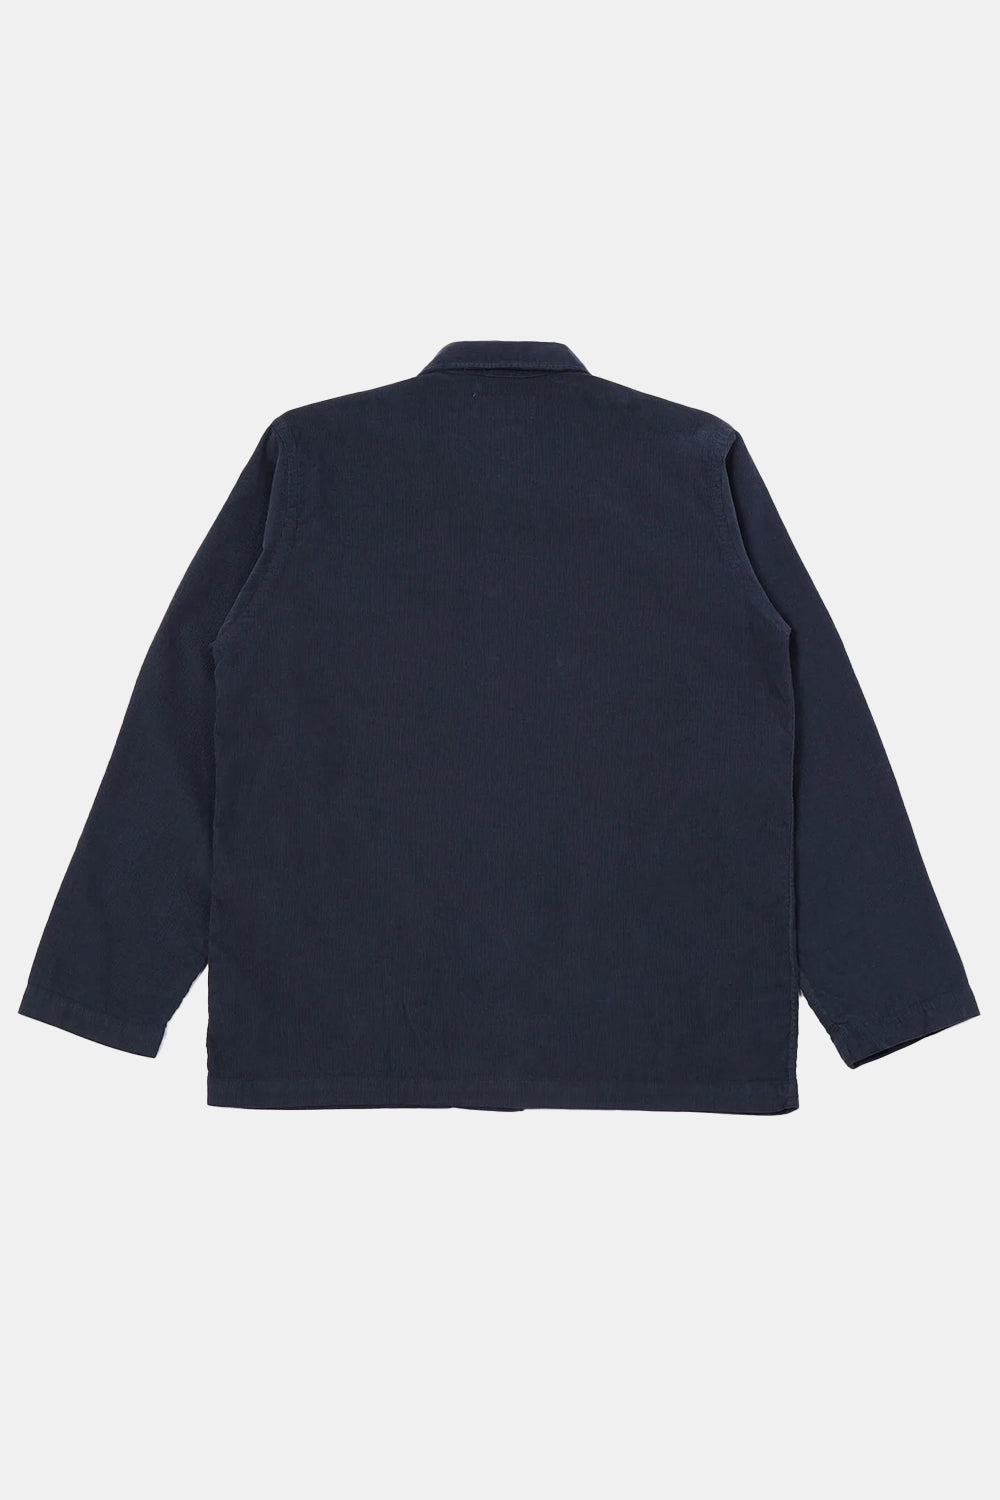 Universal Works Fine Cord Bakers Overshirt (Navy)